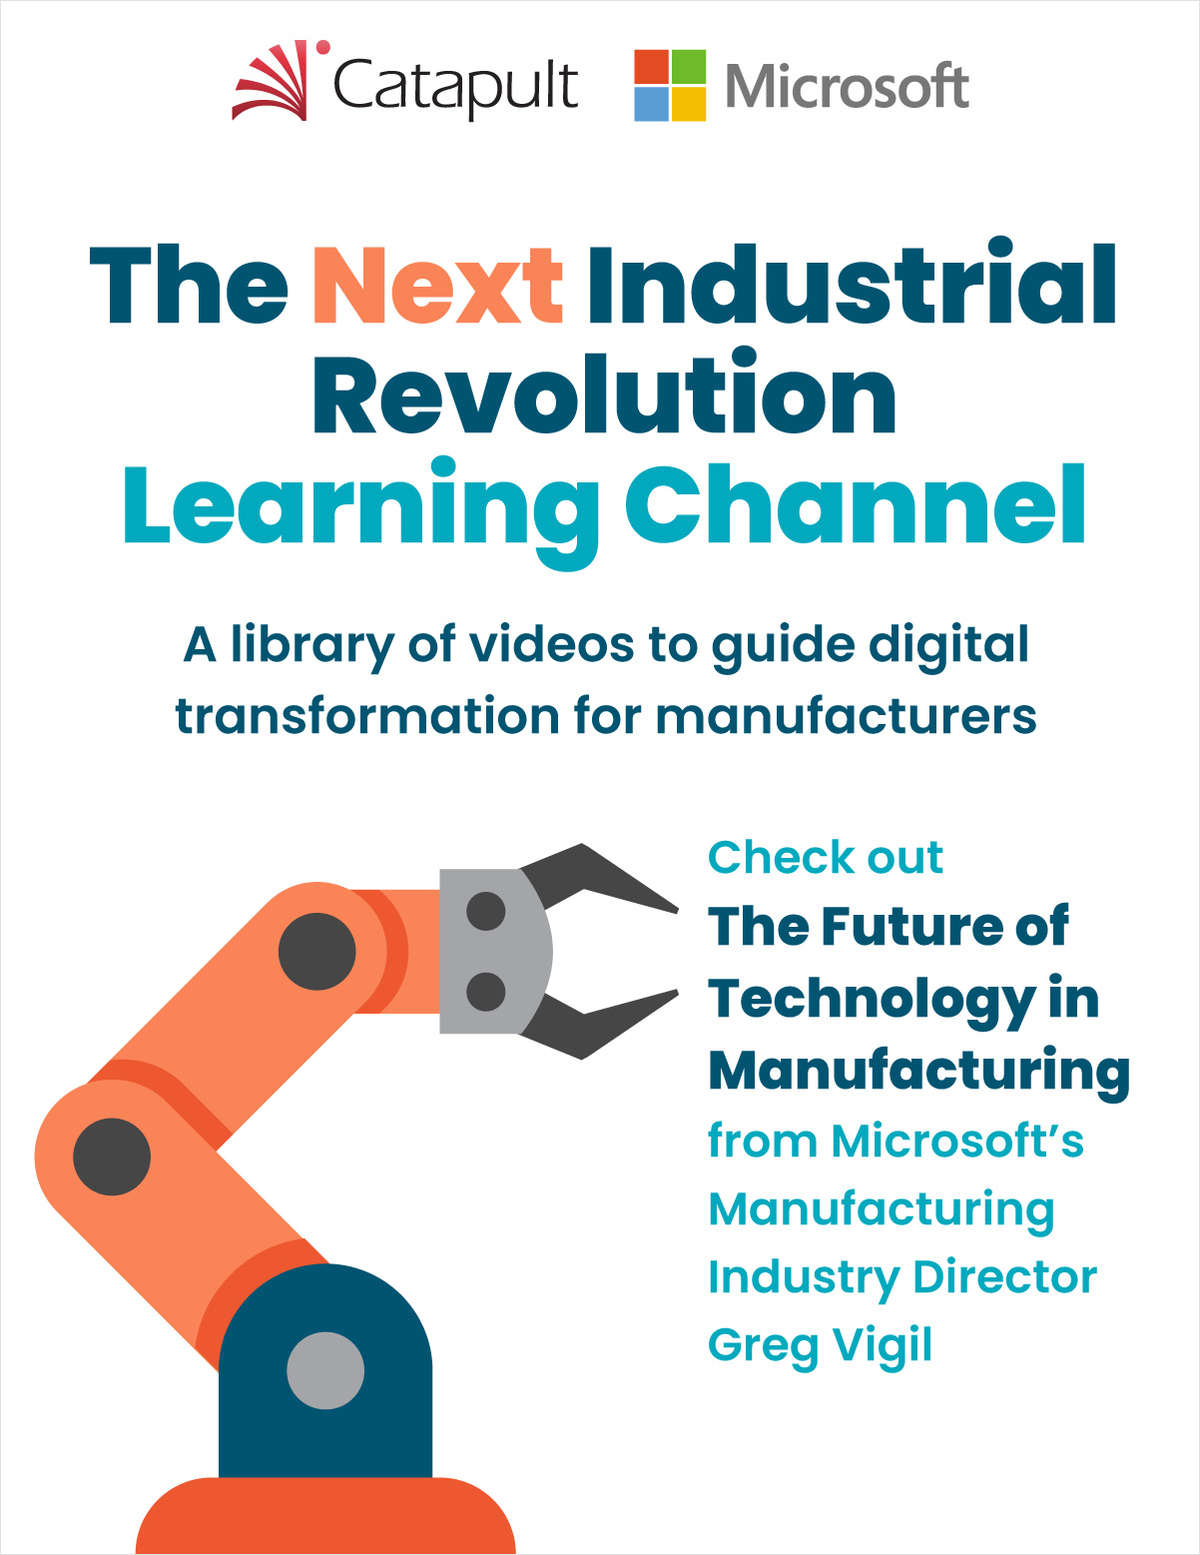 The Next Industrial Revolution Learning Channel